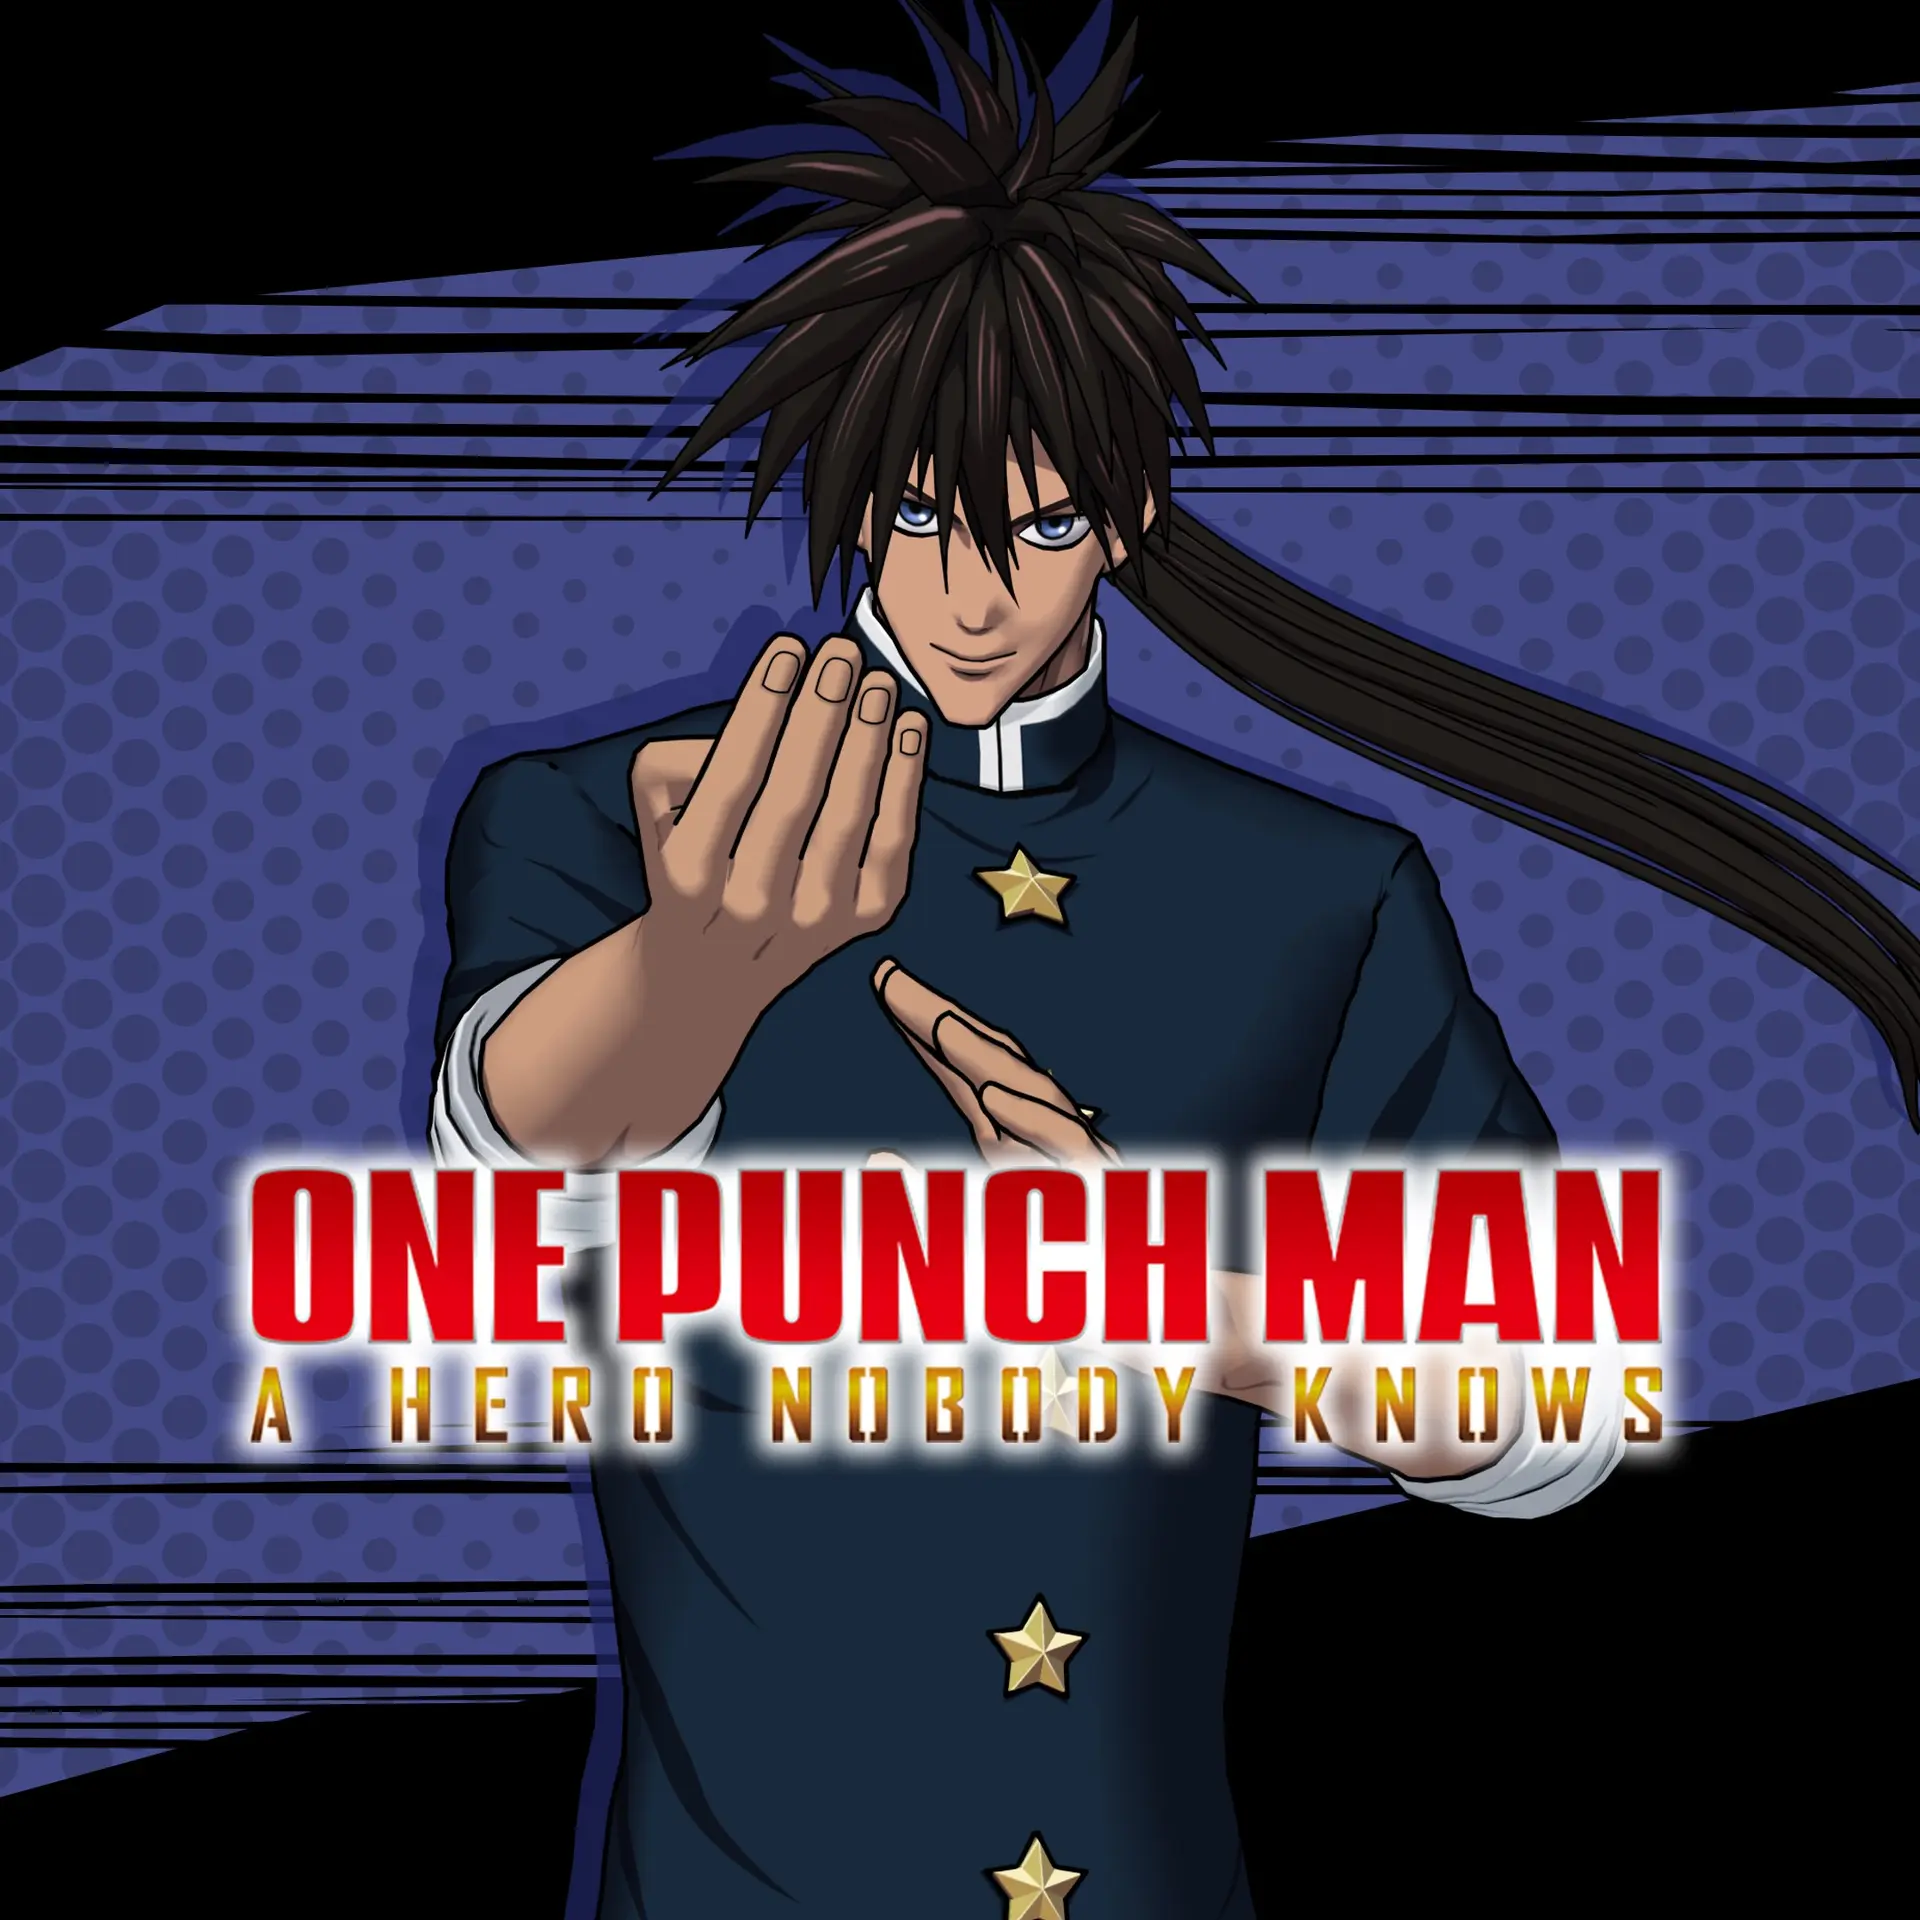 ONE PUNCH MAN: A HERO NOBODY KNOWS DLC Pack 1: Suiryu (Xbox Game EU)